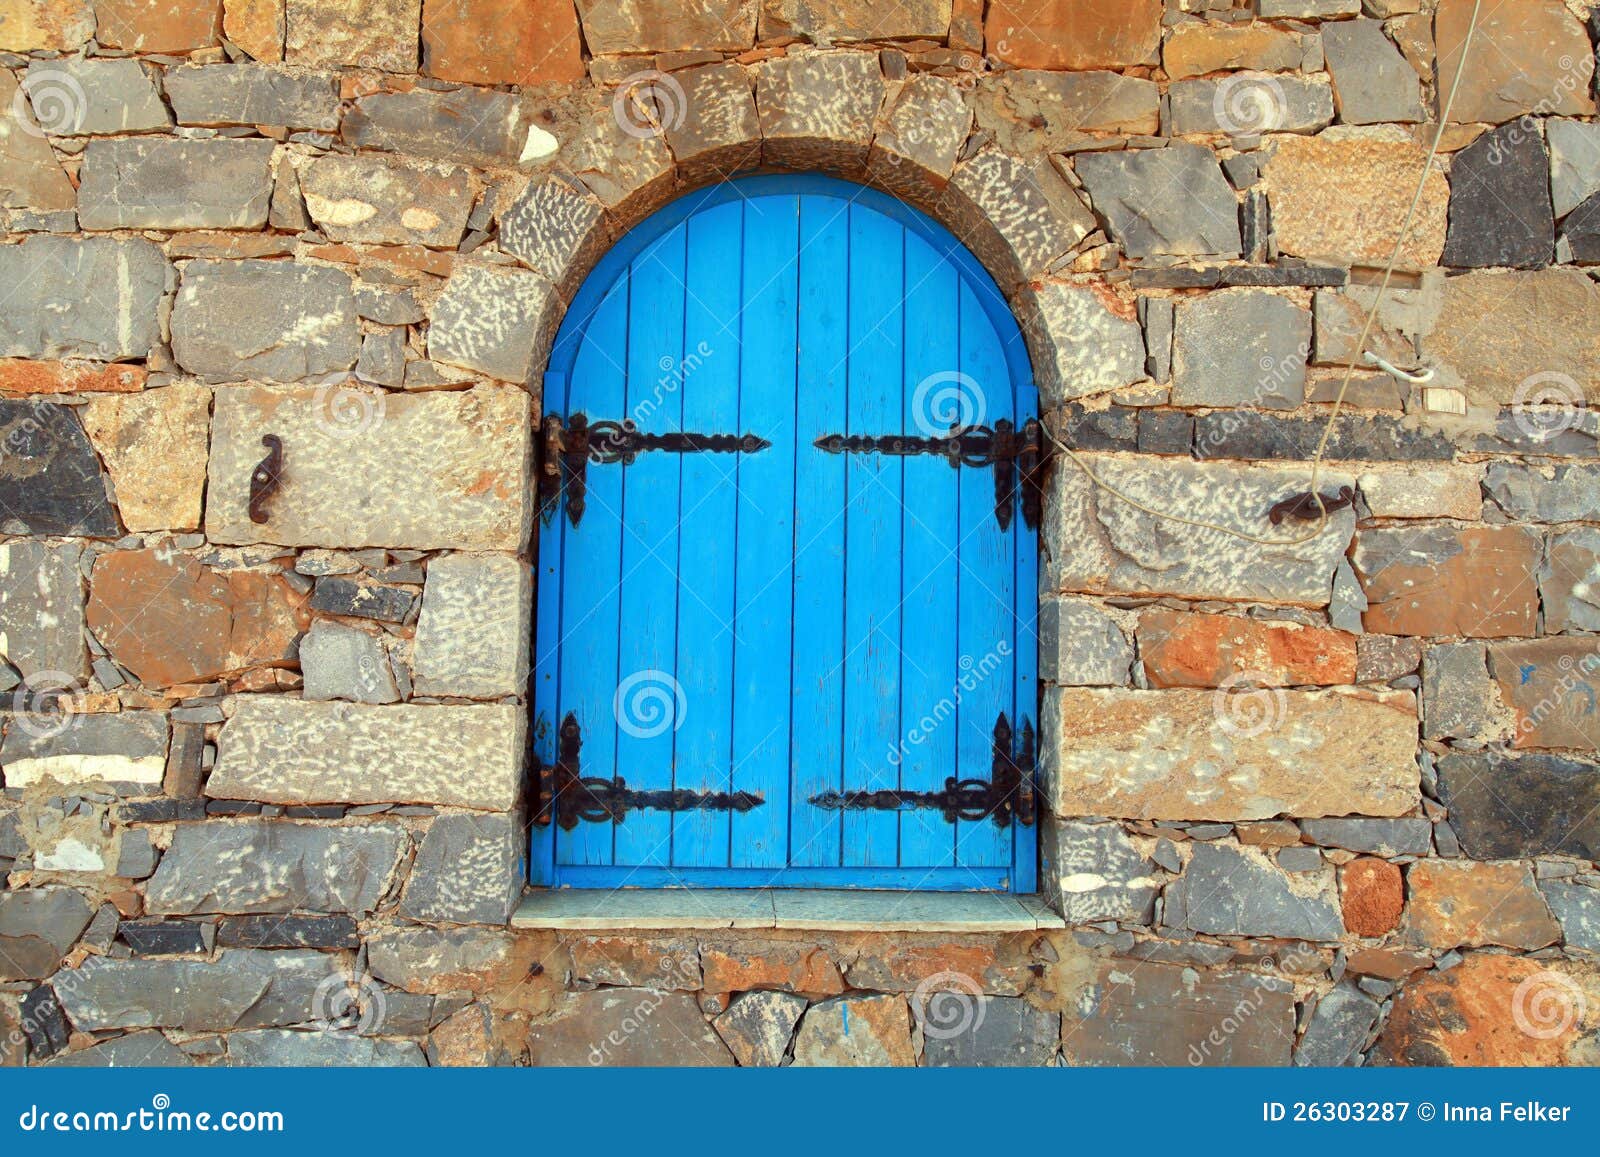 Vintage window with blue close shutters in old stone wall, Crete 